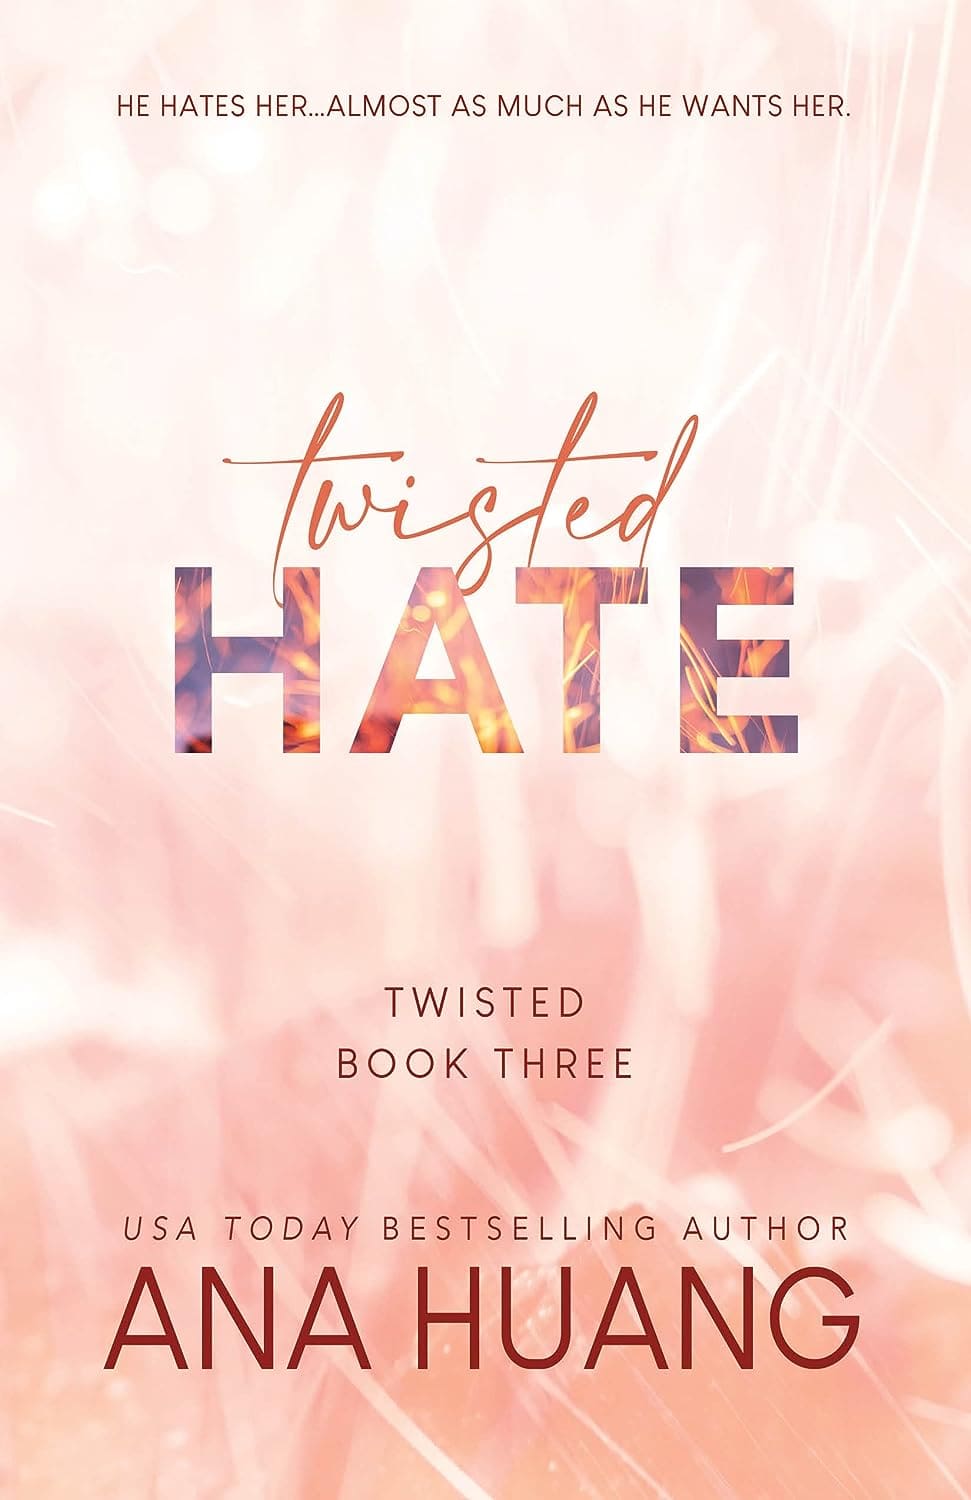 Twisted Hate Book By Ana Huang